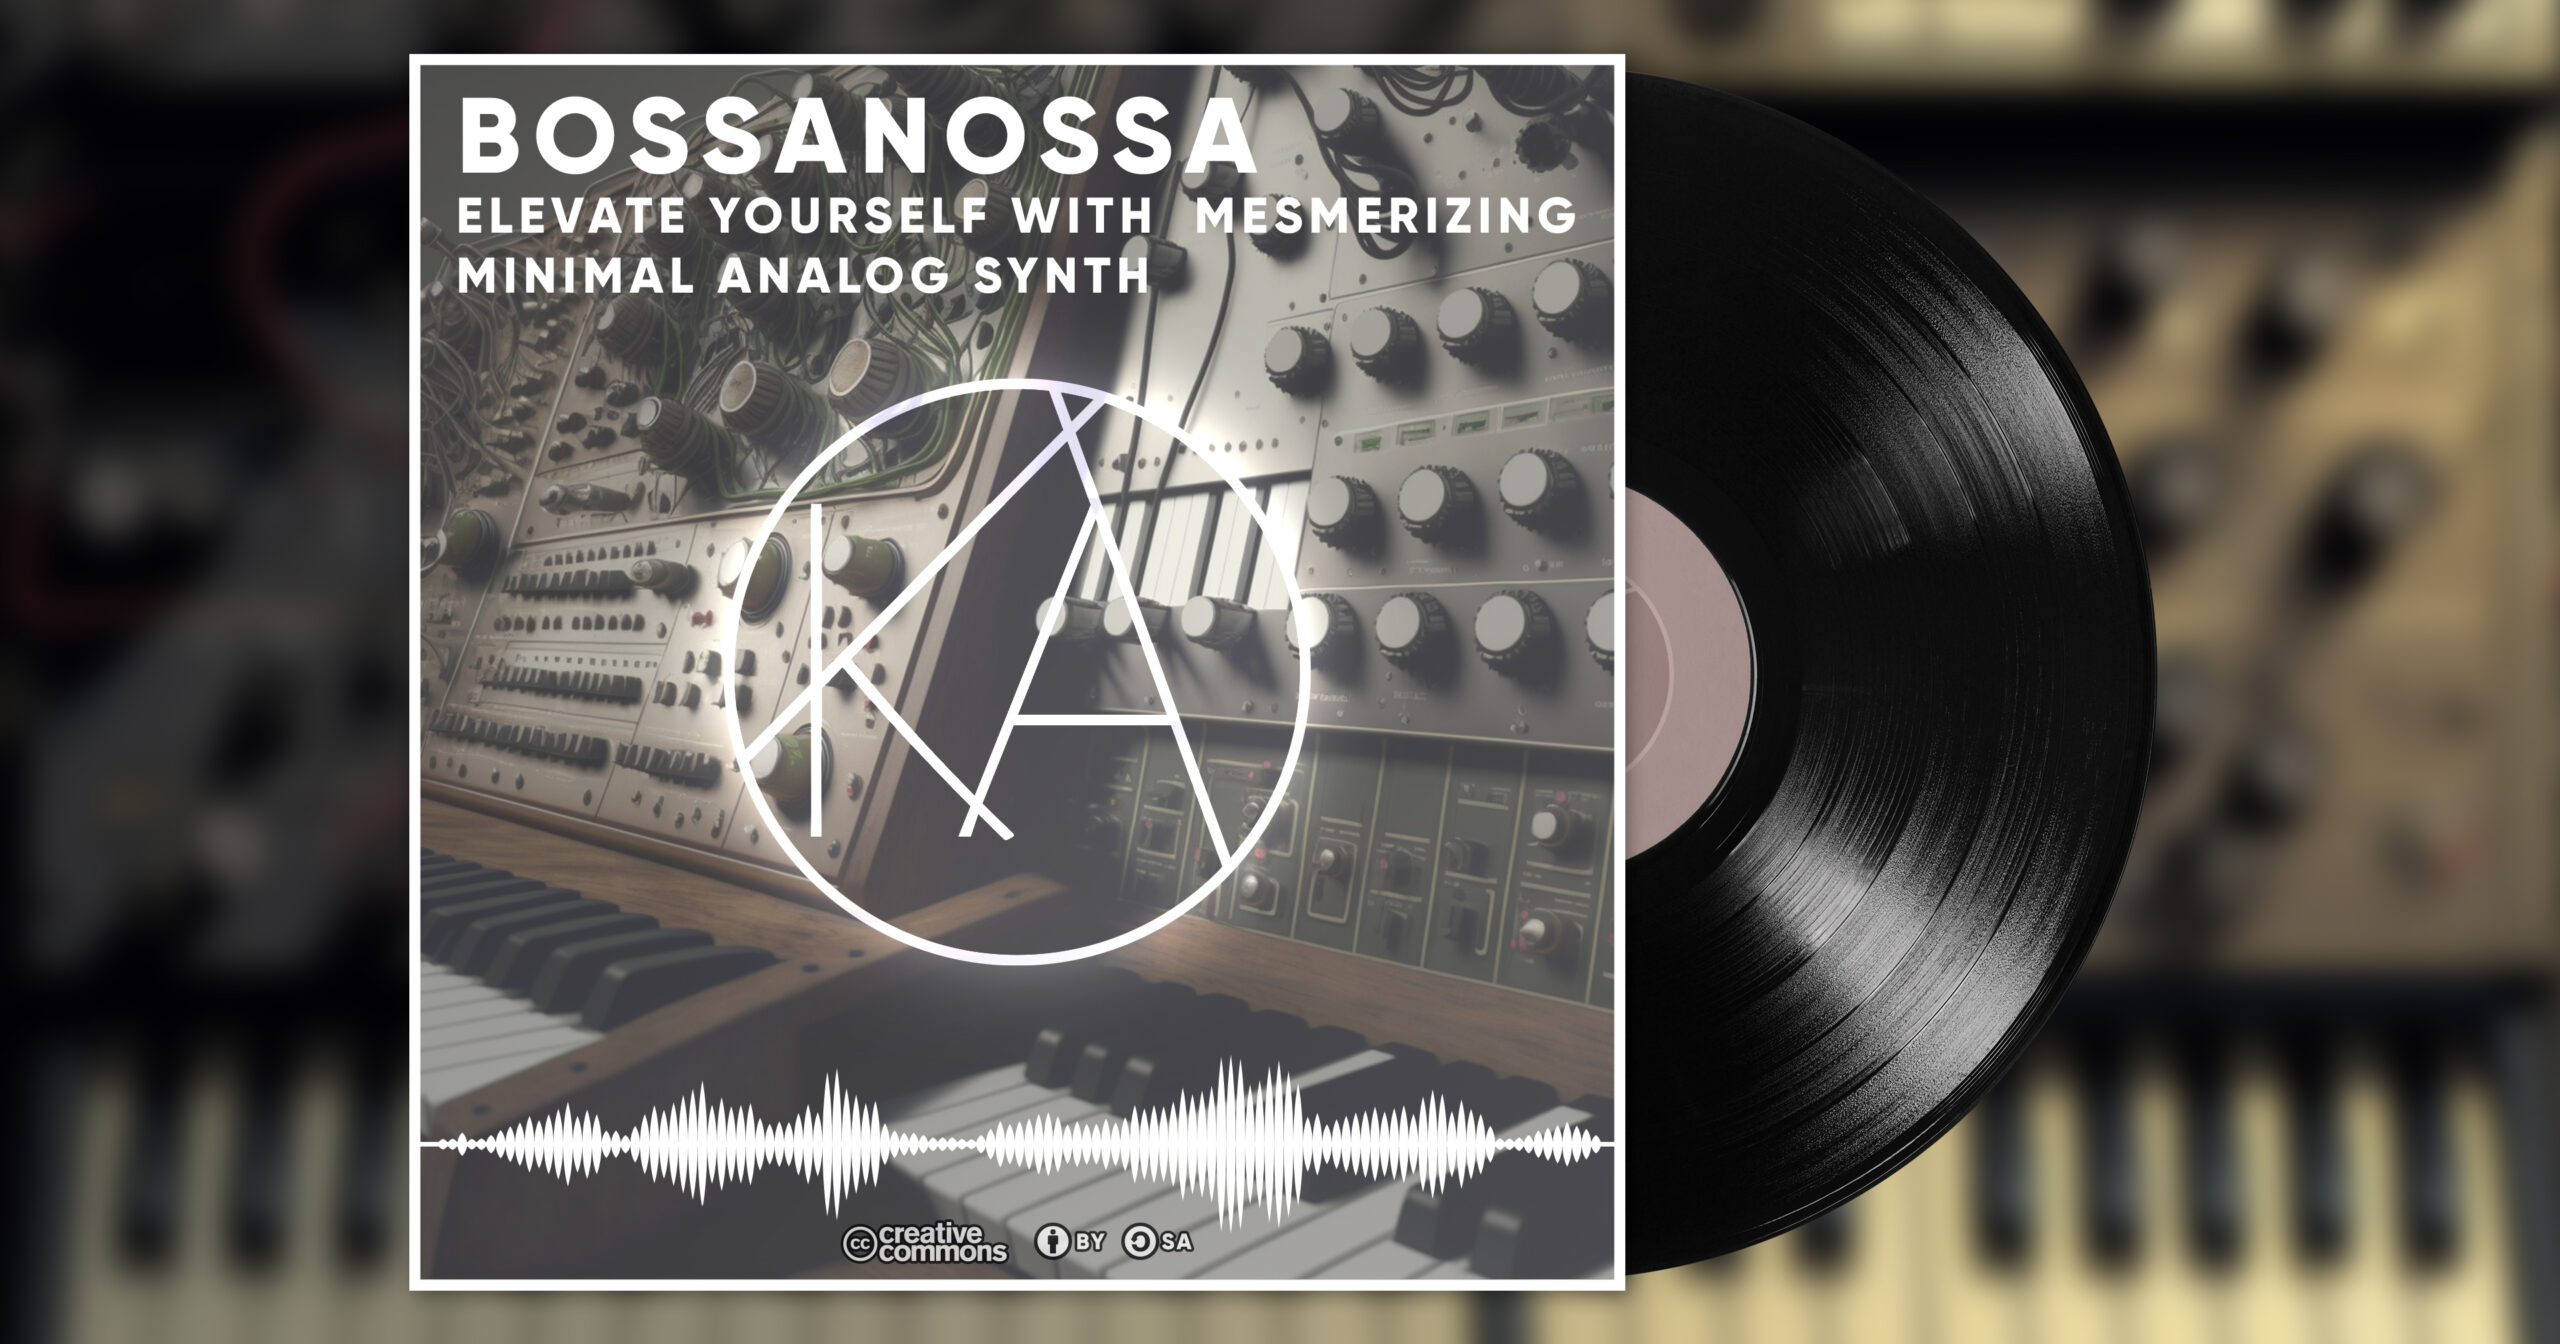 BossaNossa is an eight-minute, 50 second minimal analog synth track with a repetitive melody that builds in intensity and creates a hypnotic atmosphere.